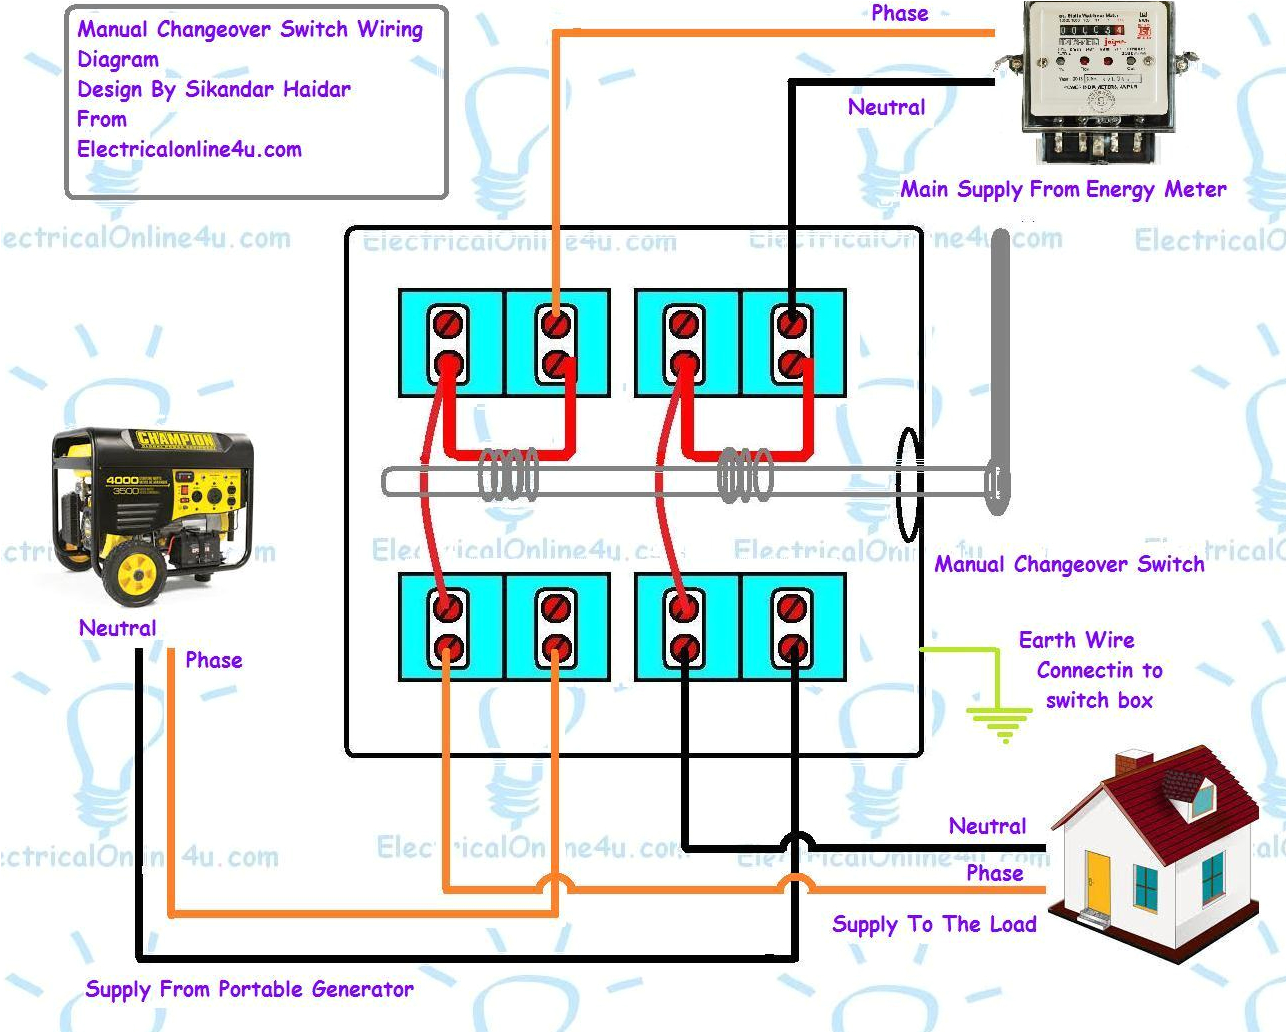 manual changeover switch wiring diagram for portable generator m generac automatic transfer switches wiring also wiring for a mig